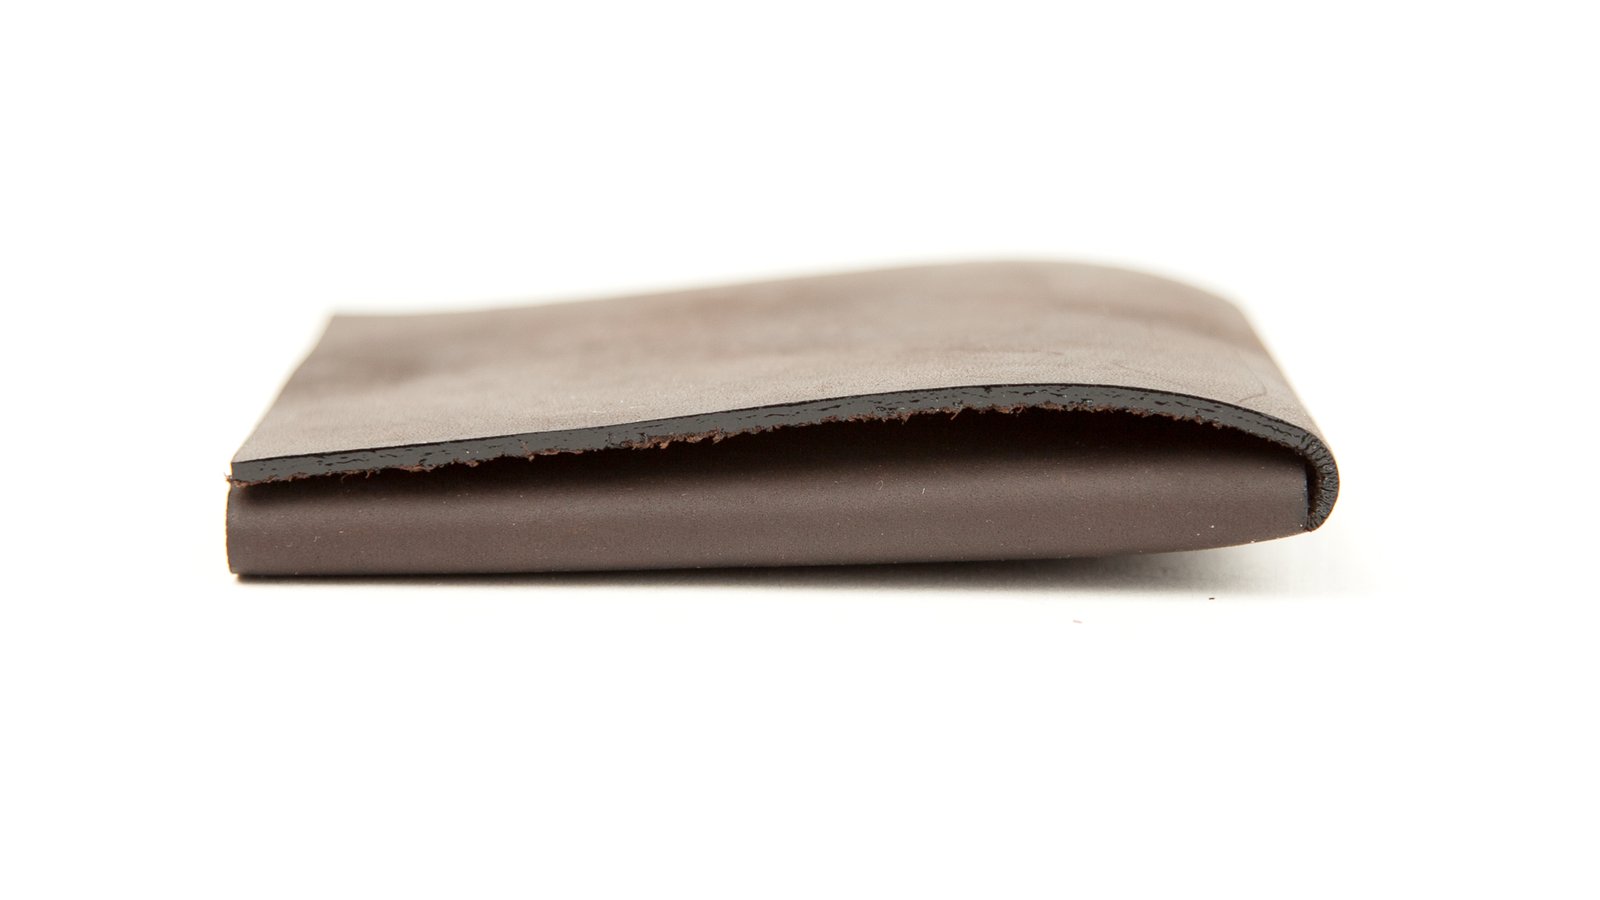 The Fang Wallet